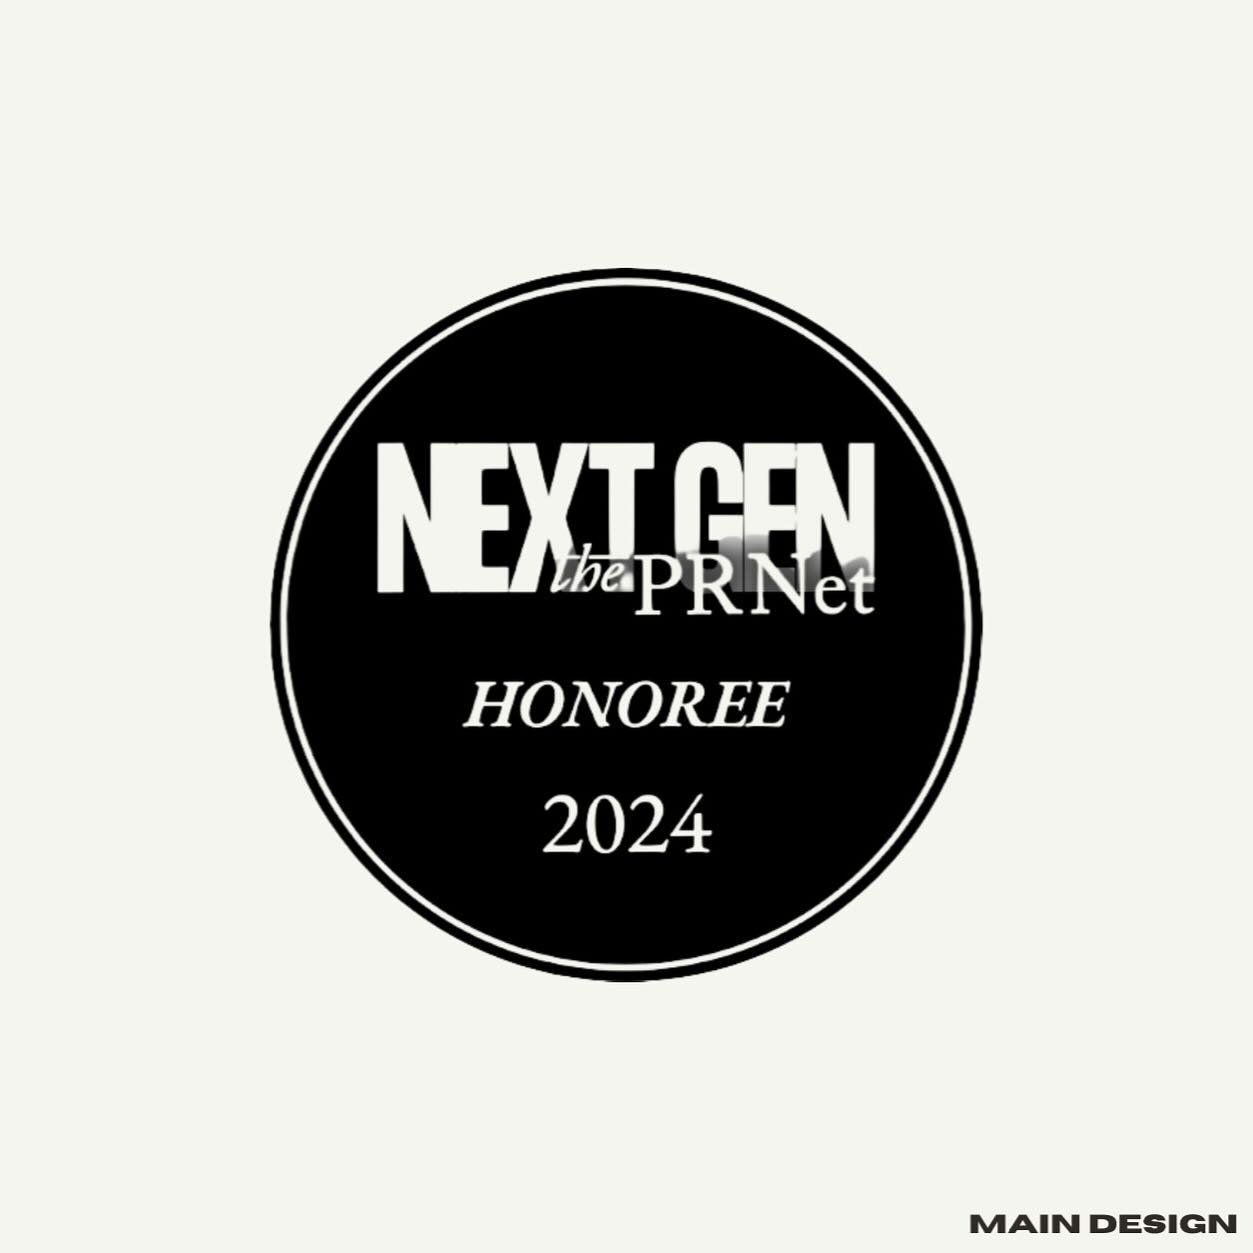 We&rsquo;re so excited to share that Main Design has been selected as a @theprnet Next Gen Agency Honoree for 2024. We&rsquo;re so grateful for our incredible team and everyone who&rsquo;s made this possible. More to come! 🤍

&mdash;&mdash;&mdash;

